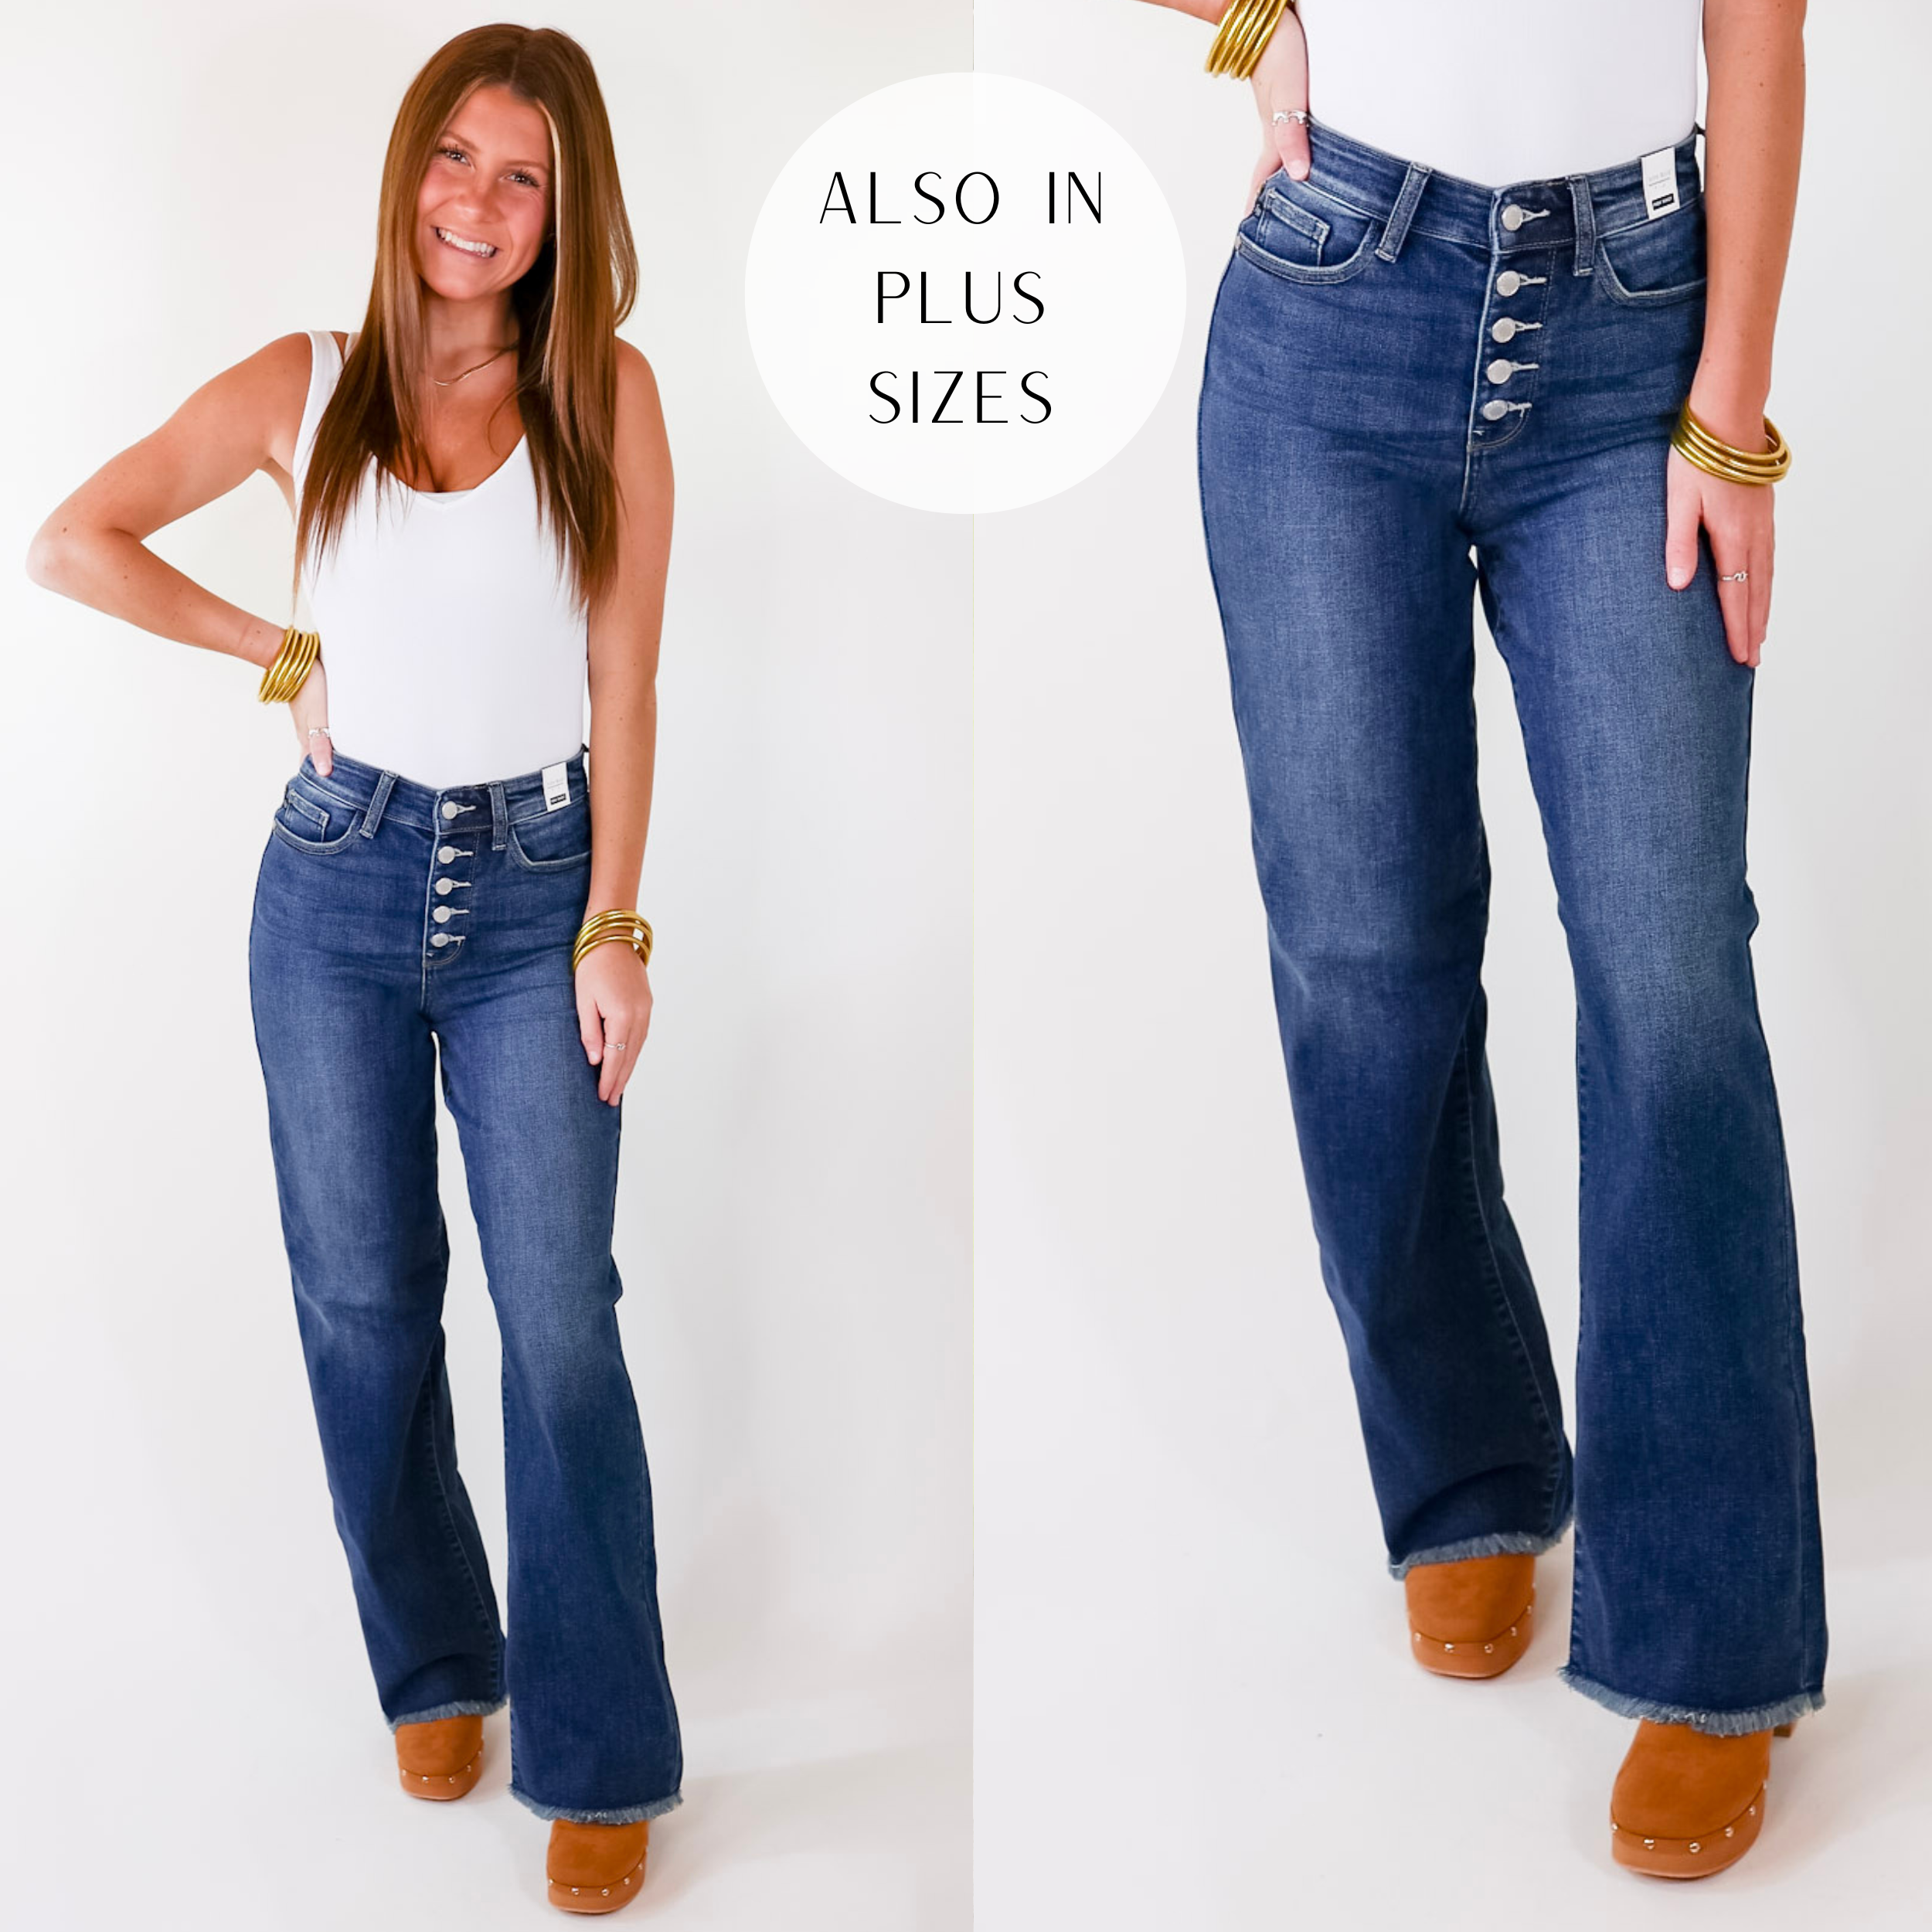 Model is wearing a pair of dark wash wide leg jeans with a button fly. Model has these jeans paired with a white tank top, gold jewelry, and tan slip on shoes.